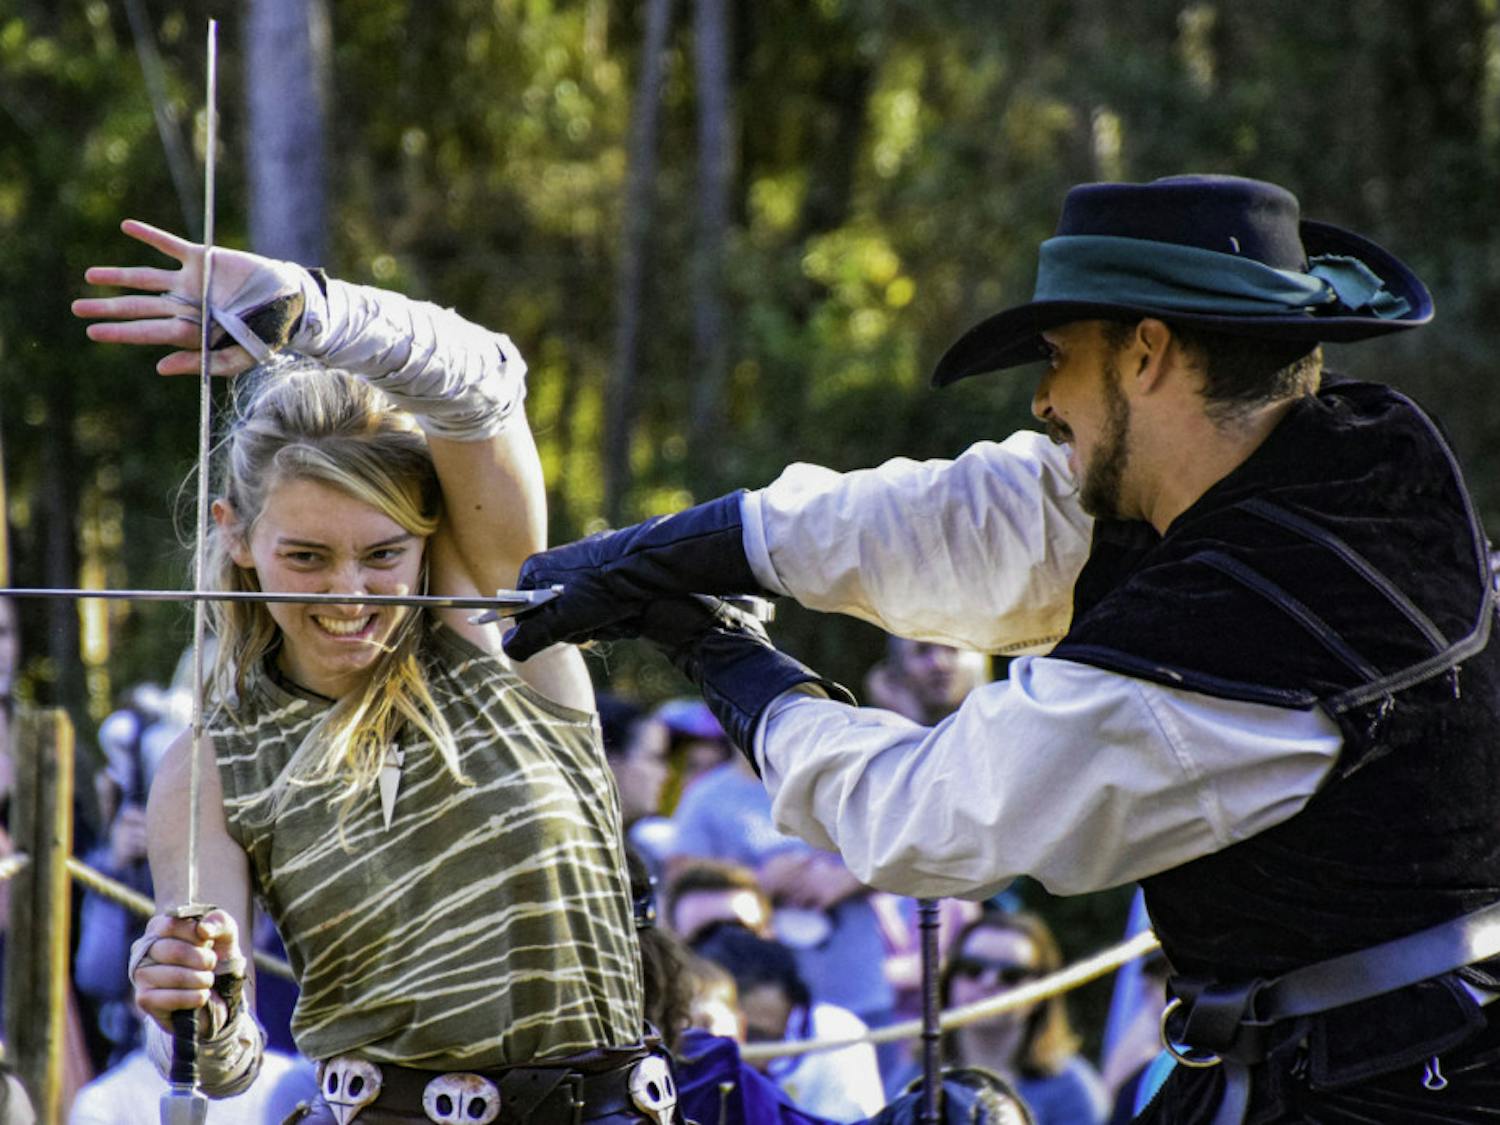 Thieves Guilde actors Sierra Barnier, 18, and Kevin Otero, 24, perform a choreographed sword fight during a chess game.